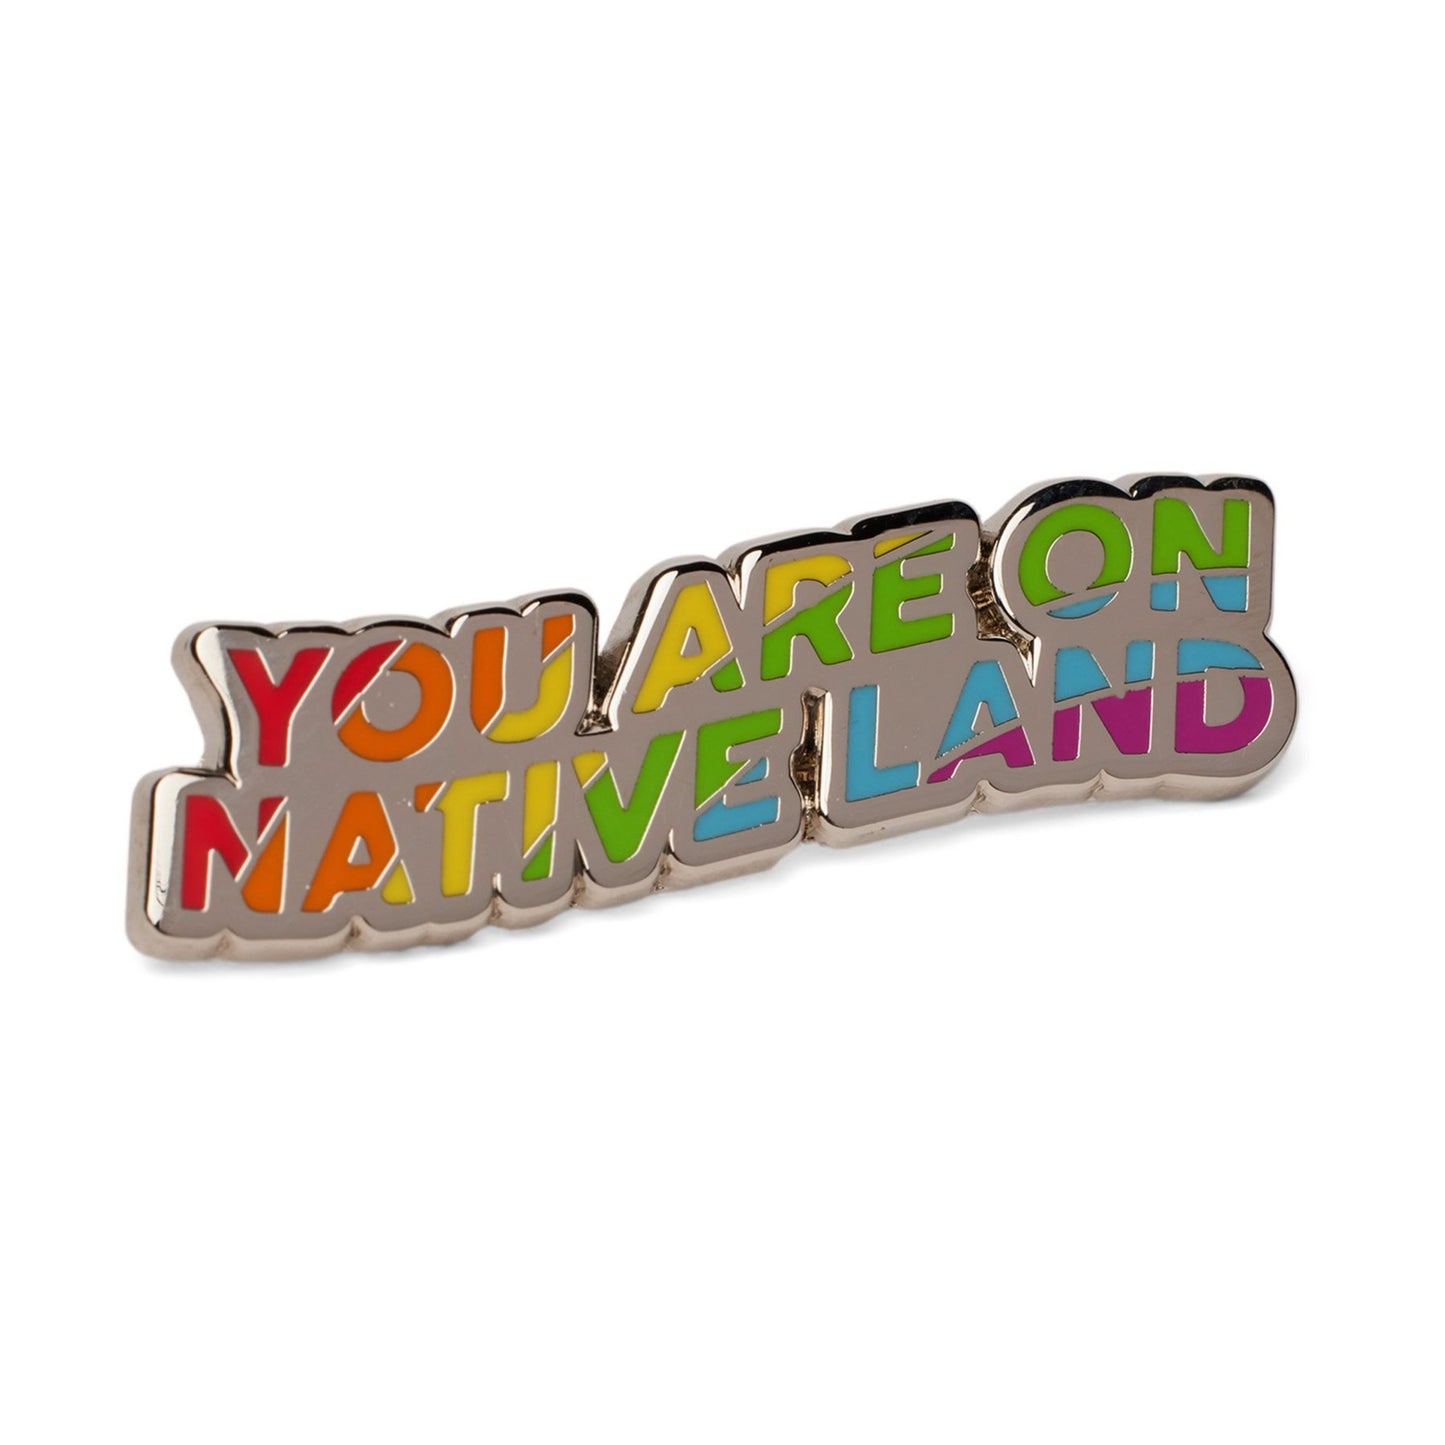 'YOU ARE ON NATIVE LAND' PIN - RAINBOW